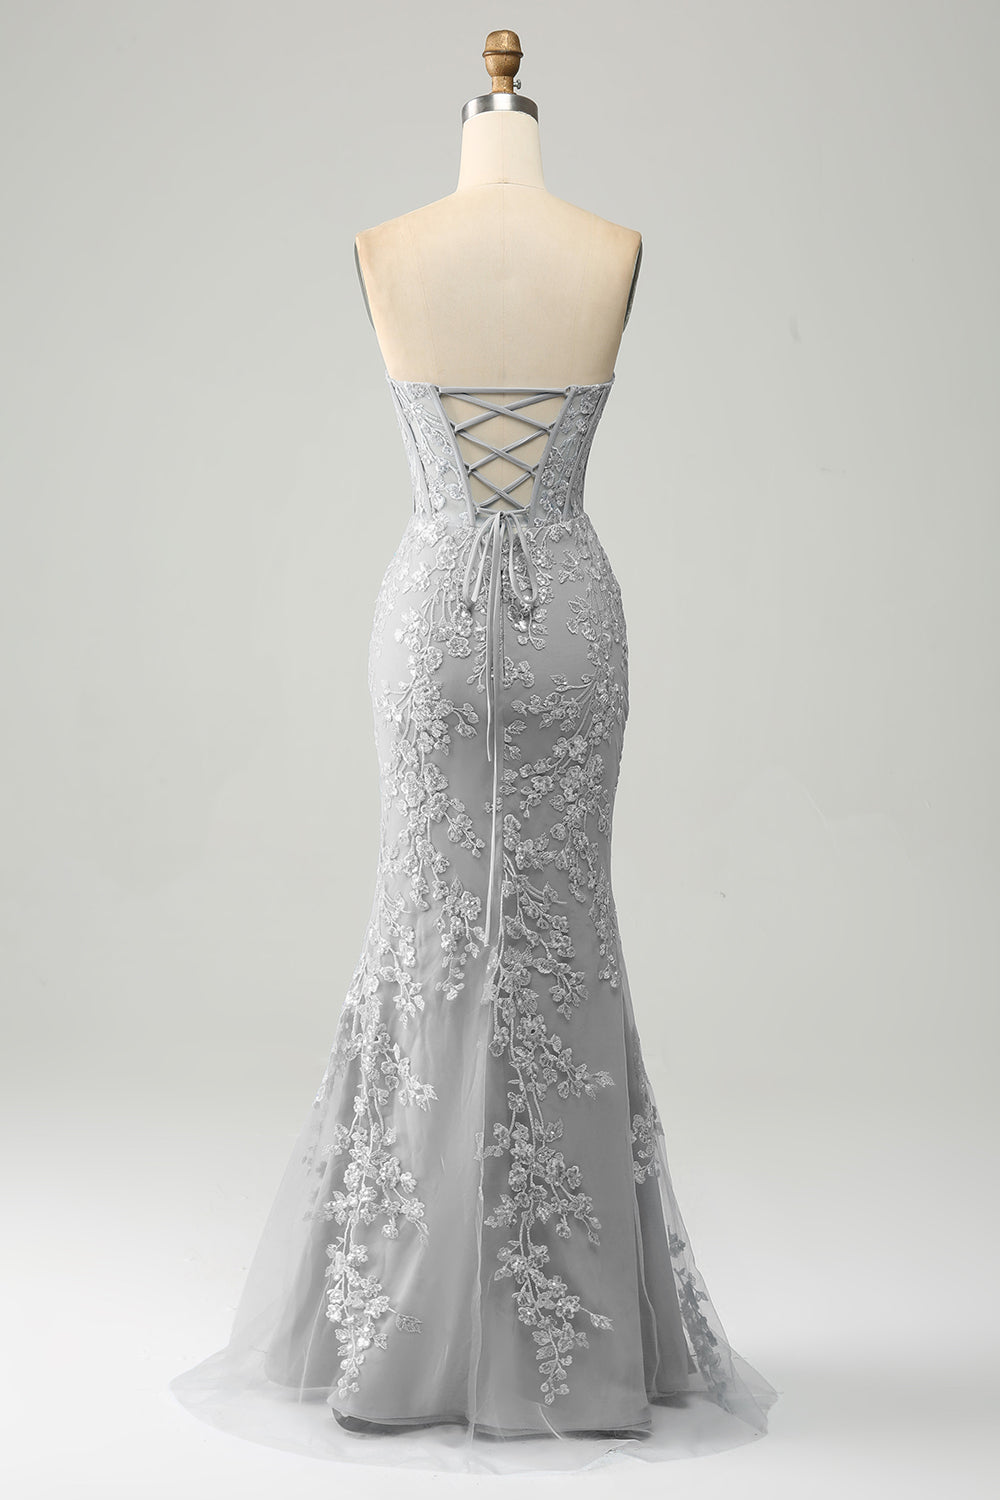 Grey Blue Mermaid Sweetheart Corset Appliques Prom Dress With Side Slit